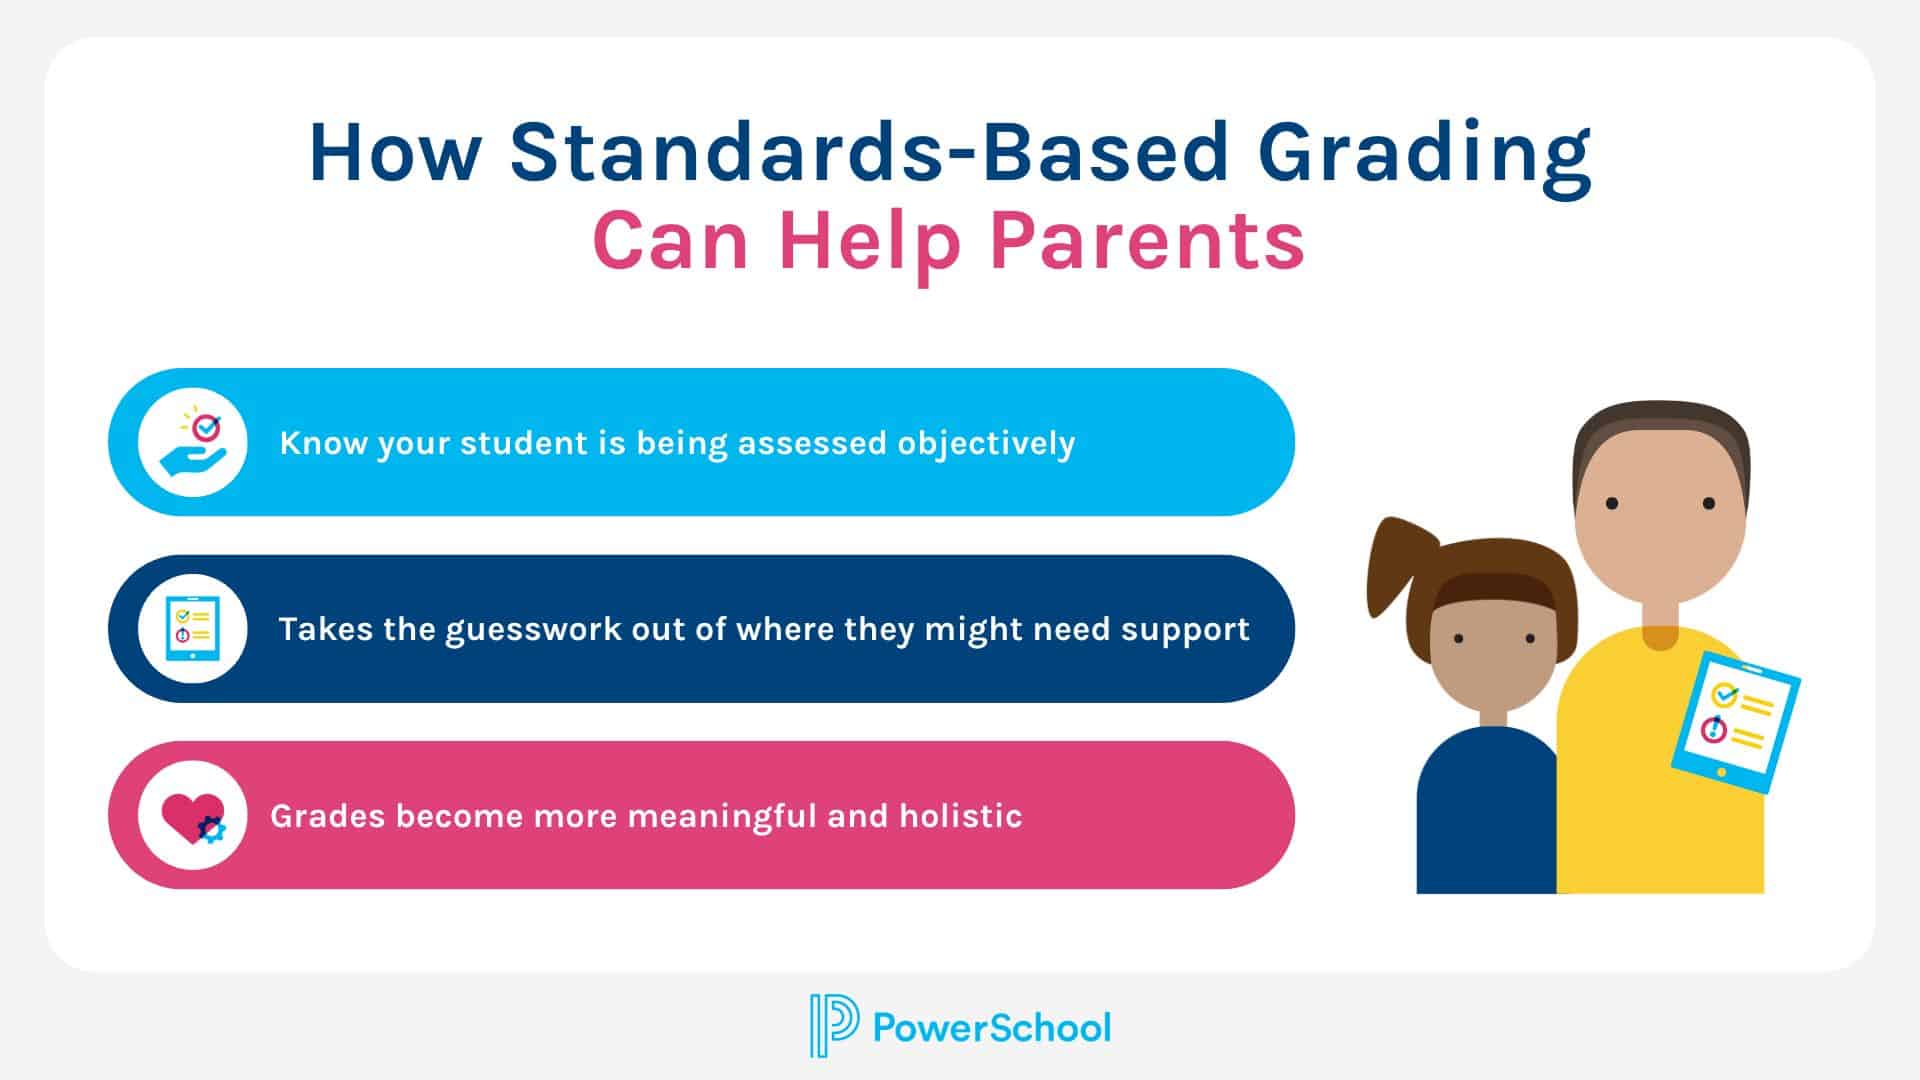 Standards Based Grading / Ratings and Grading Scale